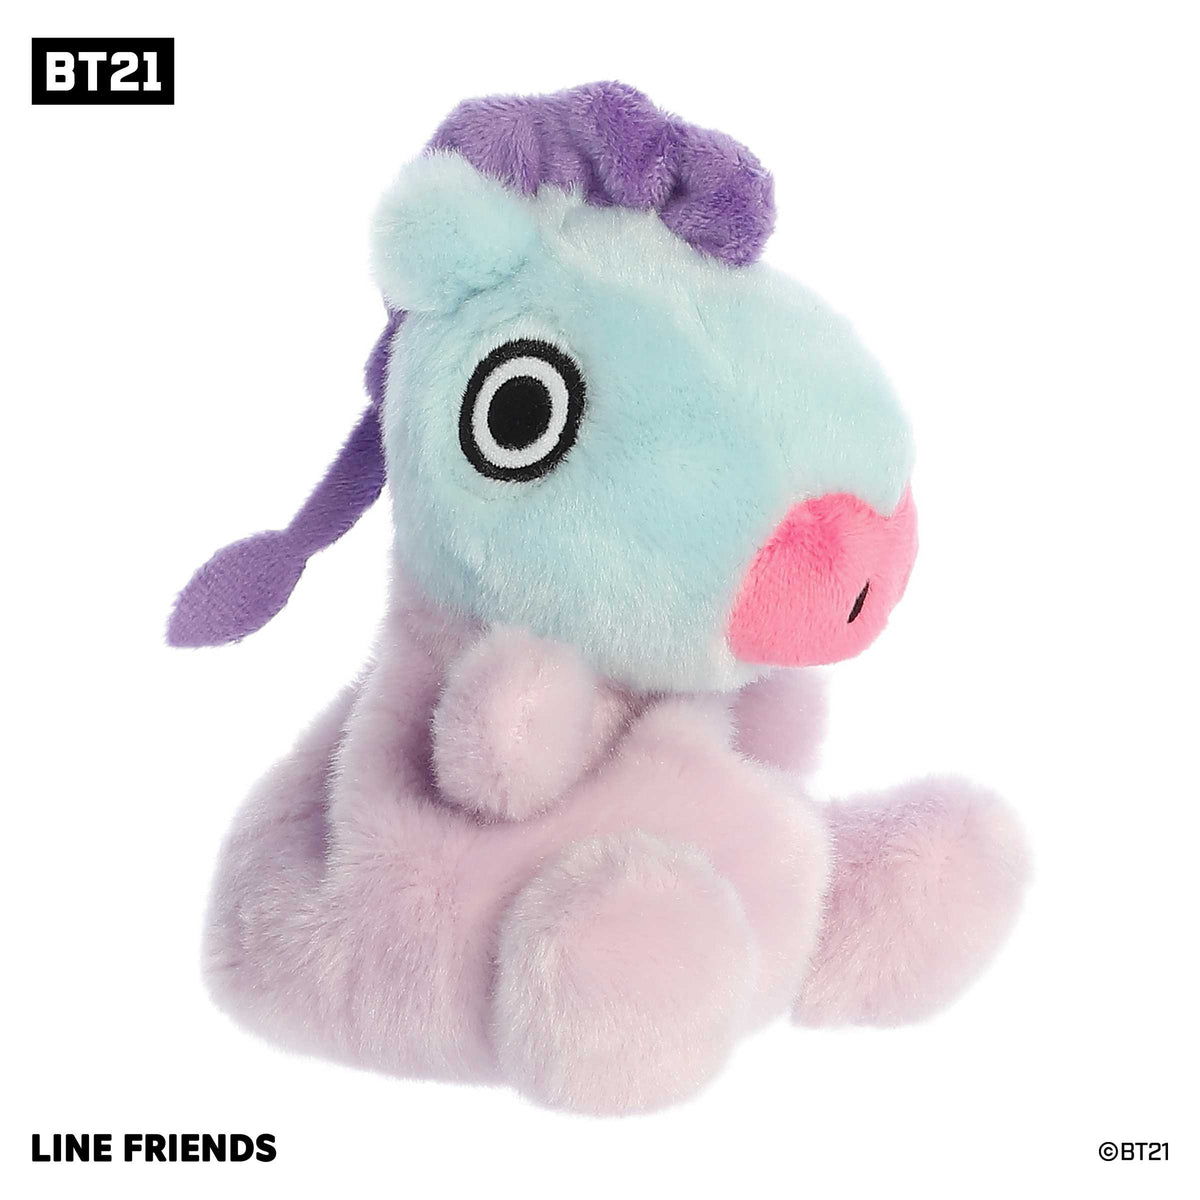 Lovable mini BT21 character plush toy with a colorful fluffy body with blue head, dark pink mouth, pink body and purple mane